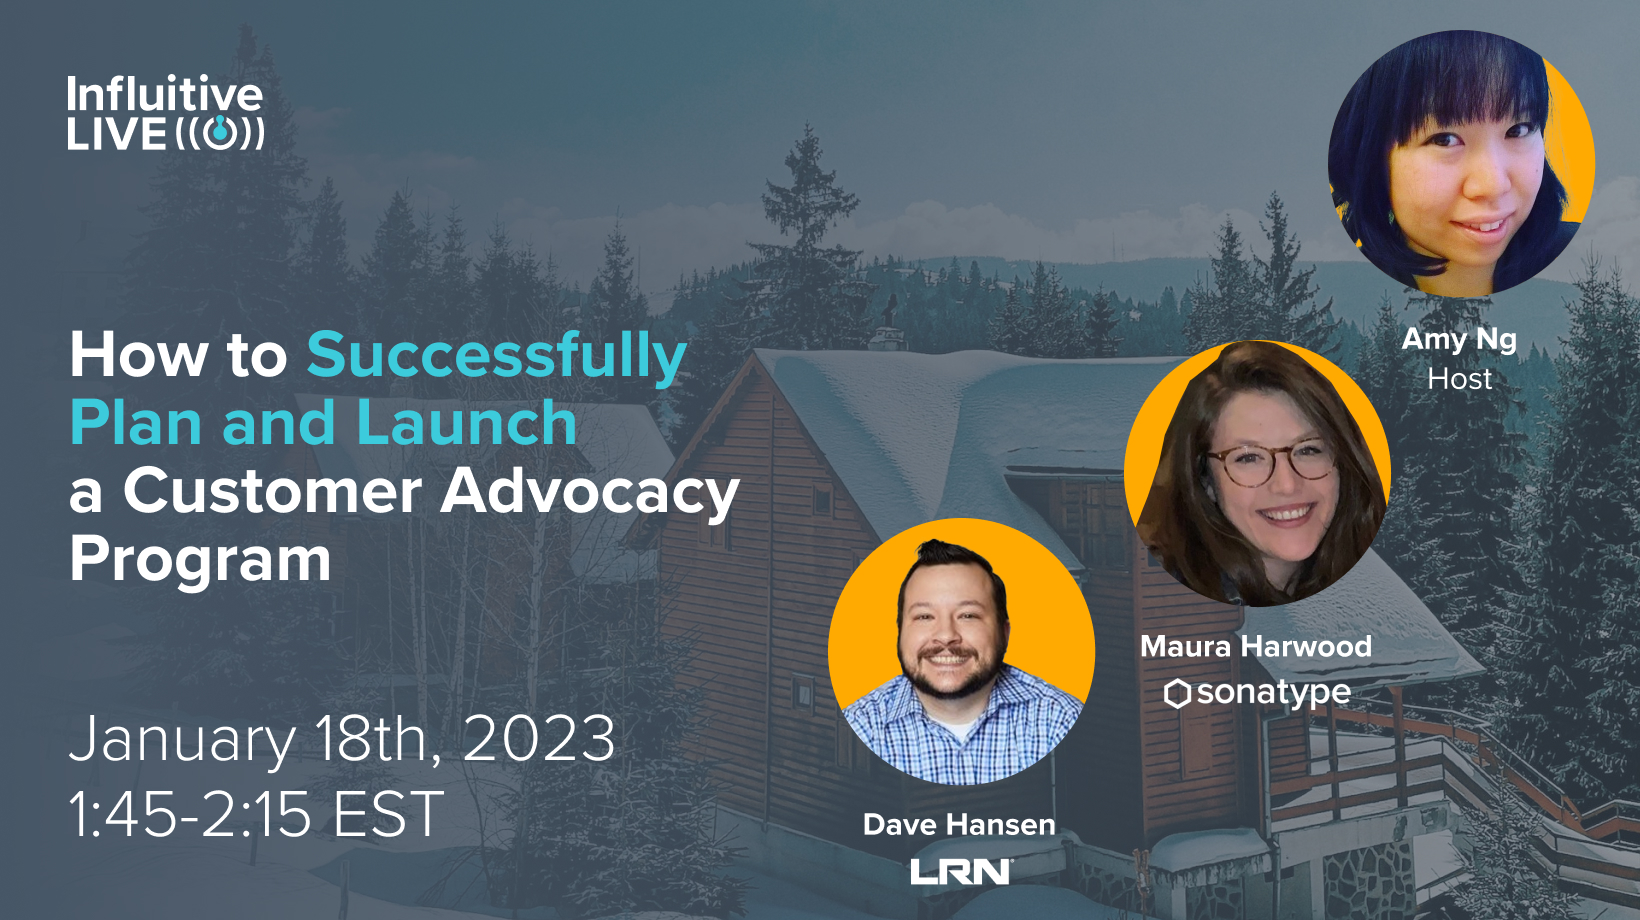 "How to Successfully Launch a Customer Advocacy Program<br />
– Amy Ng (Influitive), Dave Hansen (LRN), Maura Harwood (Sonatype)"